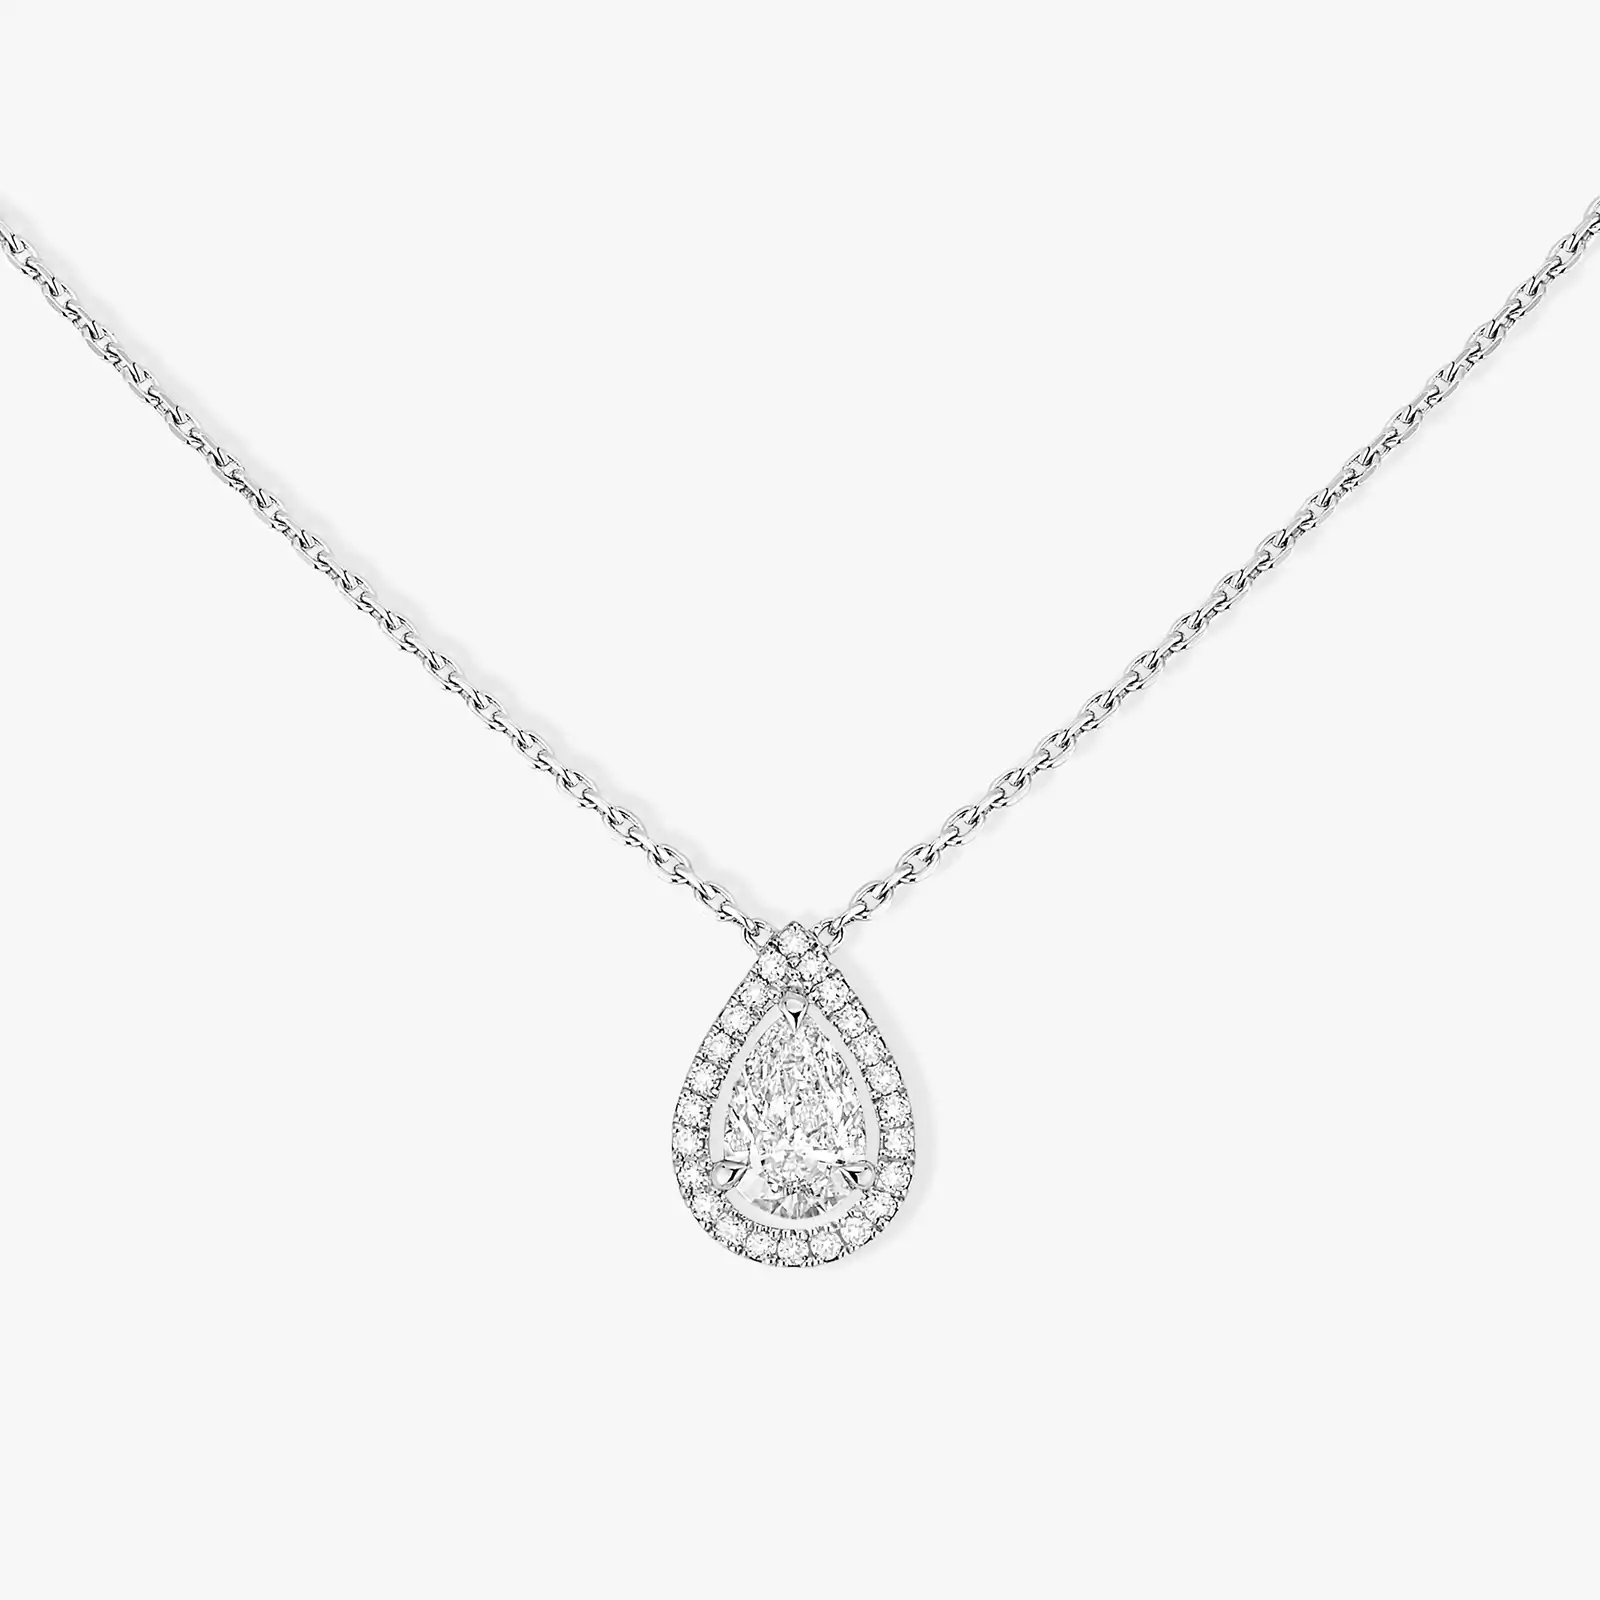 M-Love Solitaire Pear Cut  White Gold For Her Diamond Necklace 08020-WG